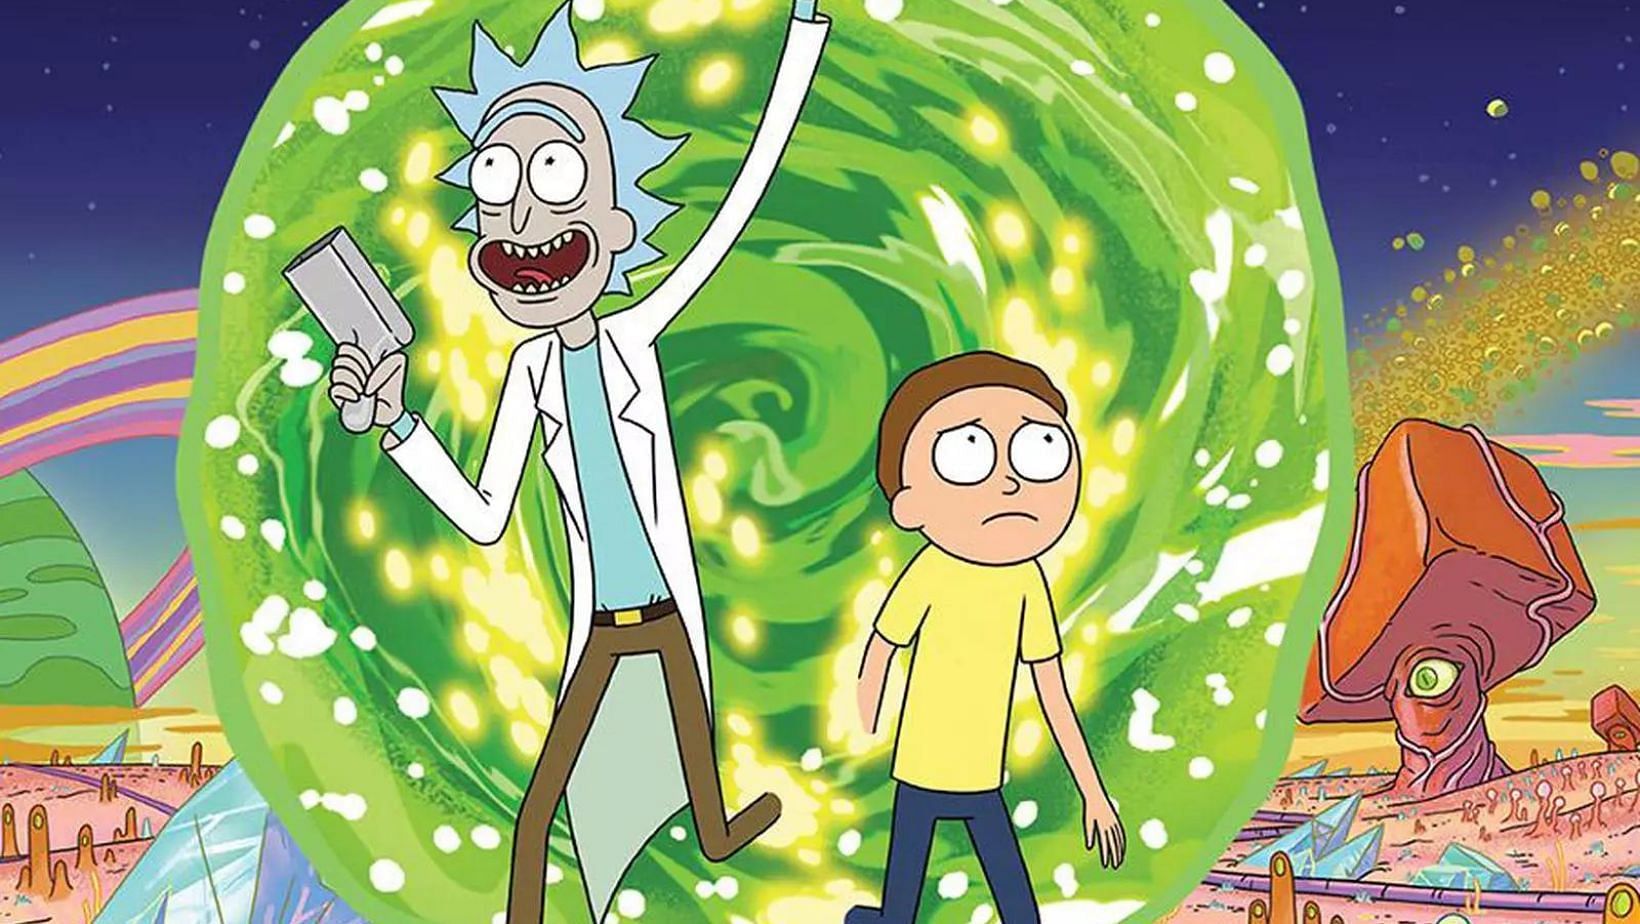 The future of Rick and Morty is in question as fans wonder who will replace Justin Roiland